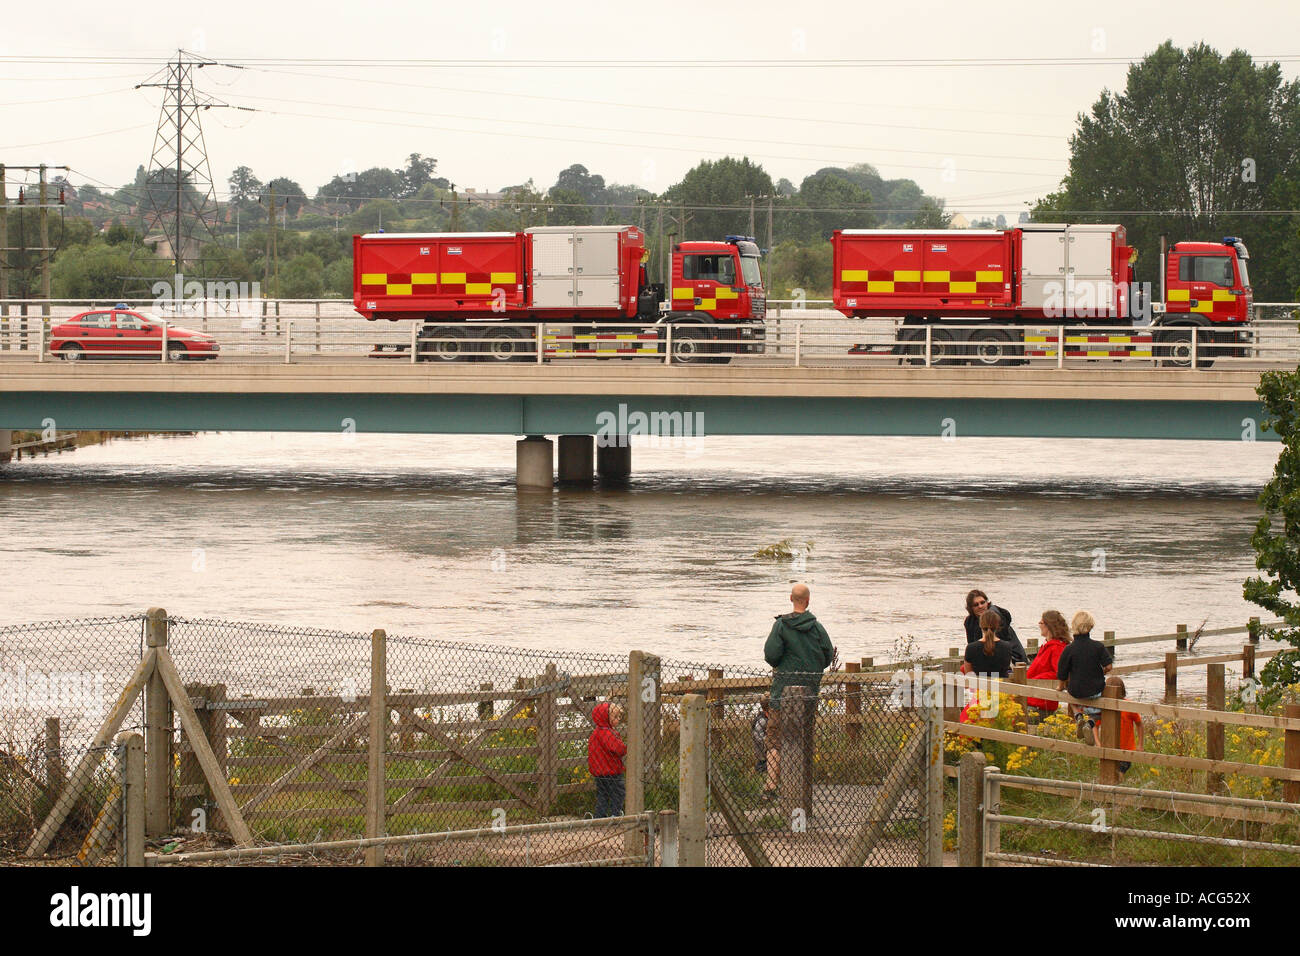 Flooding Gloucester fire brigade pumping vehicles on bridge over swollen River Severn July 2007 Stock Photo